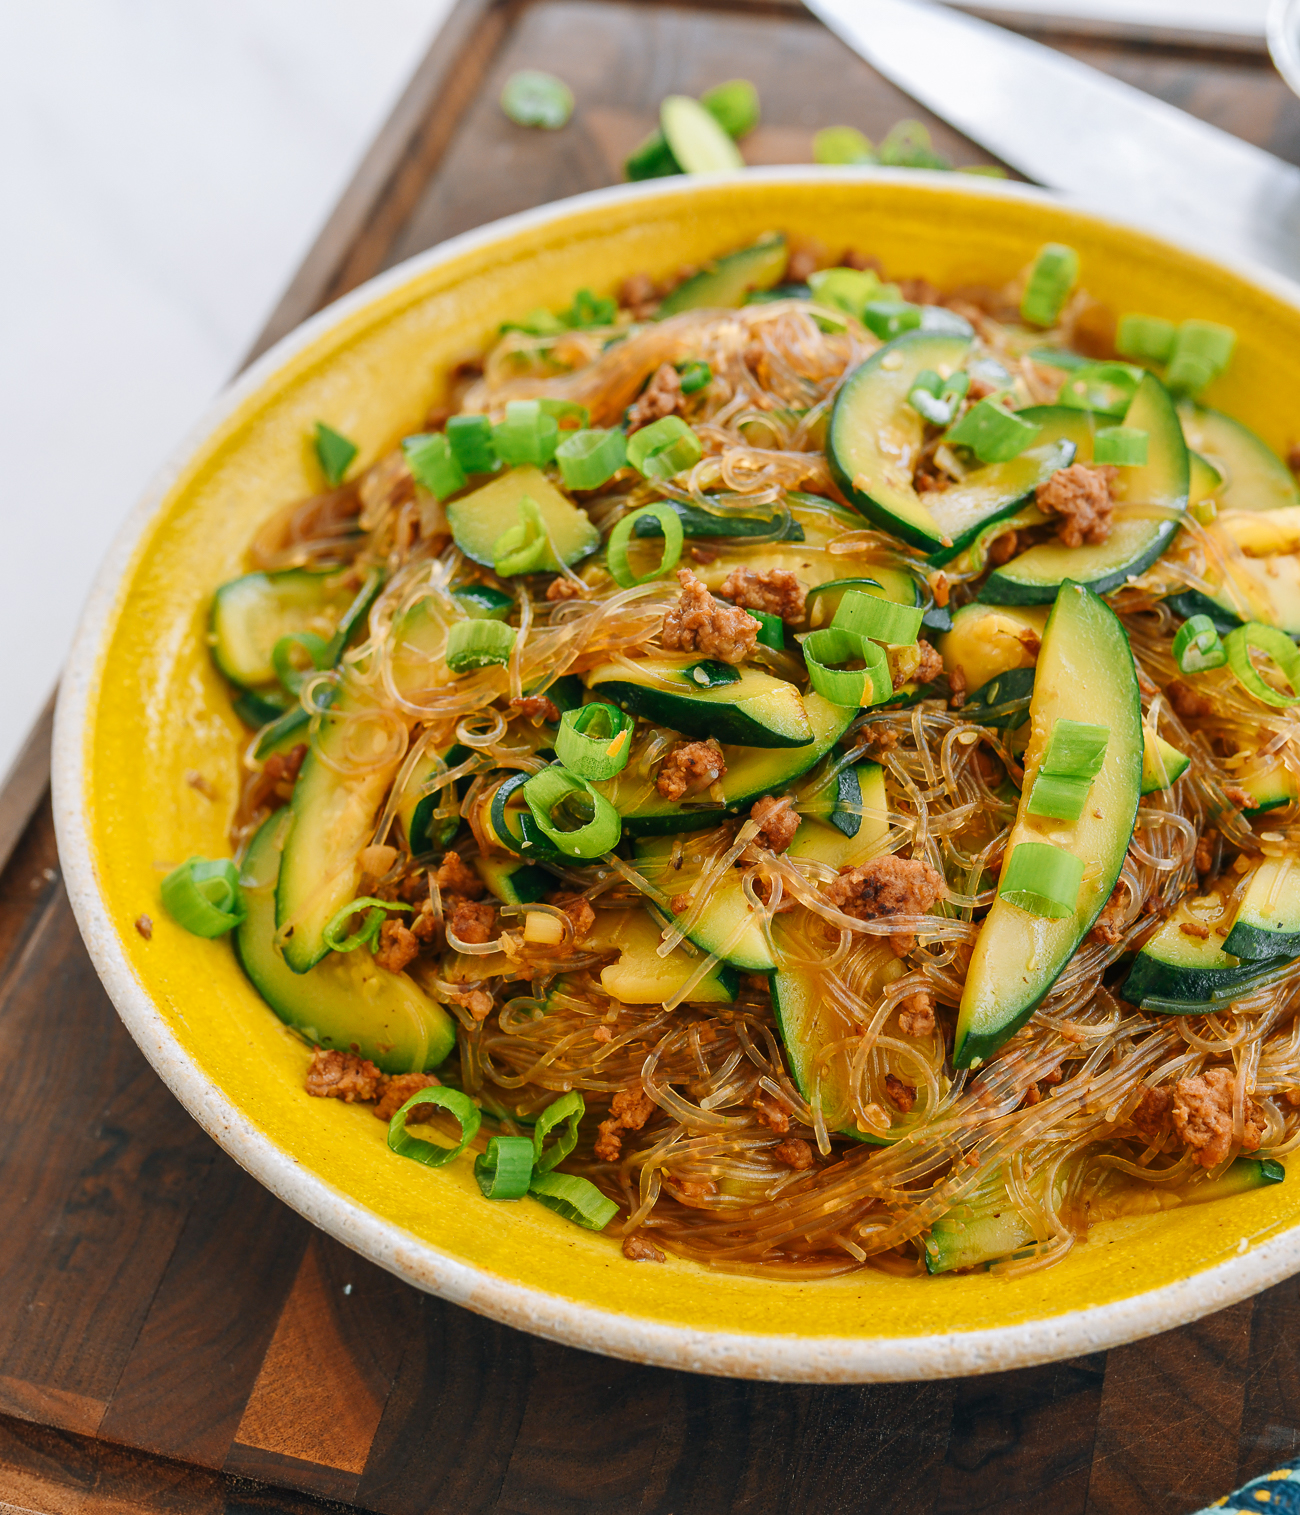 Zucchini with Glass Noodles and Ground Pork